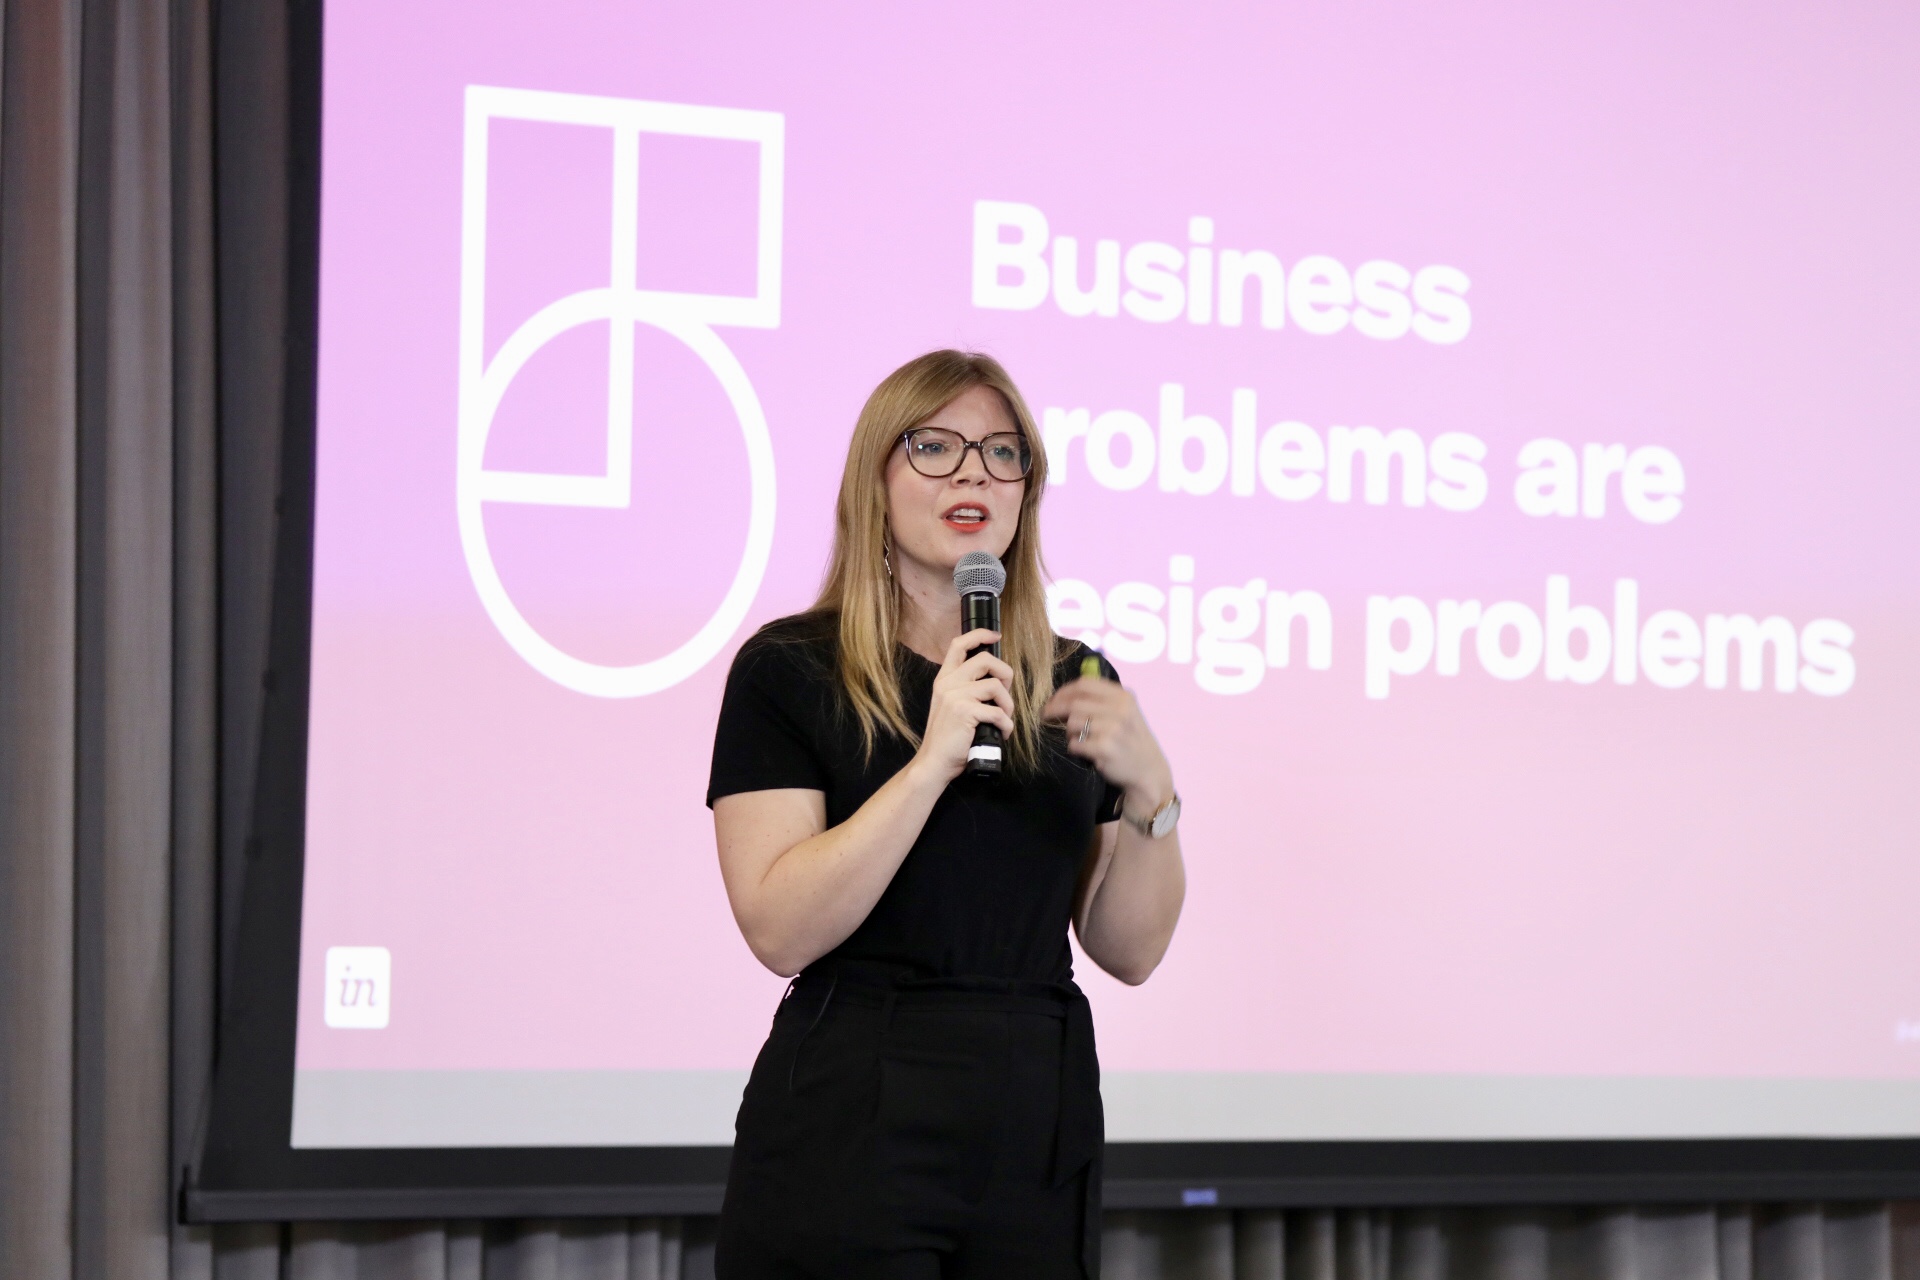 Me in front of a slide reading 'Business problems are design problems'